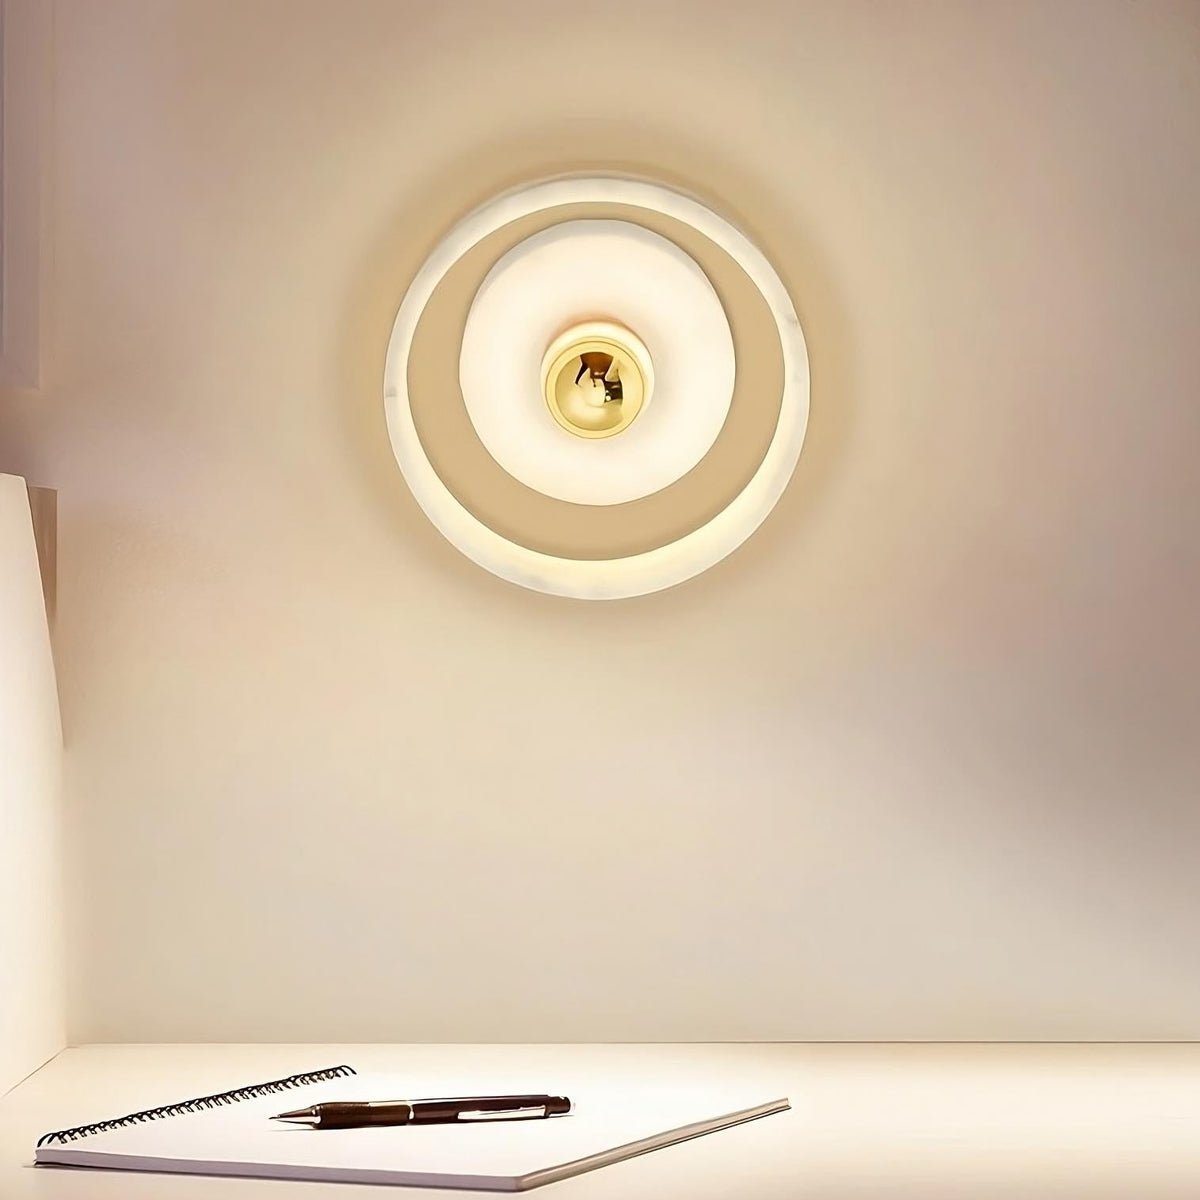 A modern Morsale.com Moonshade Natural Marble Wall Light Fixture with concentric circular designs illuminates a minimalistic workspace. Below, a white desk holds a black pen and an open spiral notebook, creating a clean and focused environment.